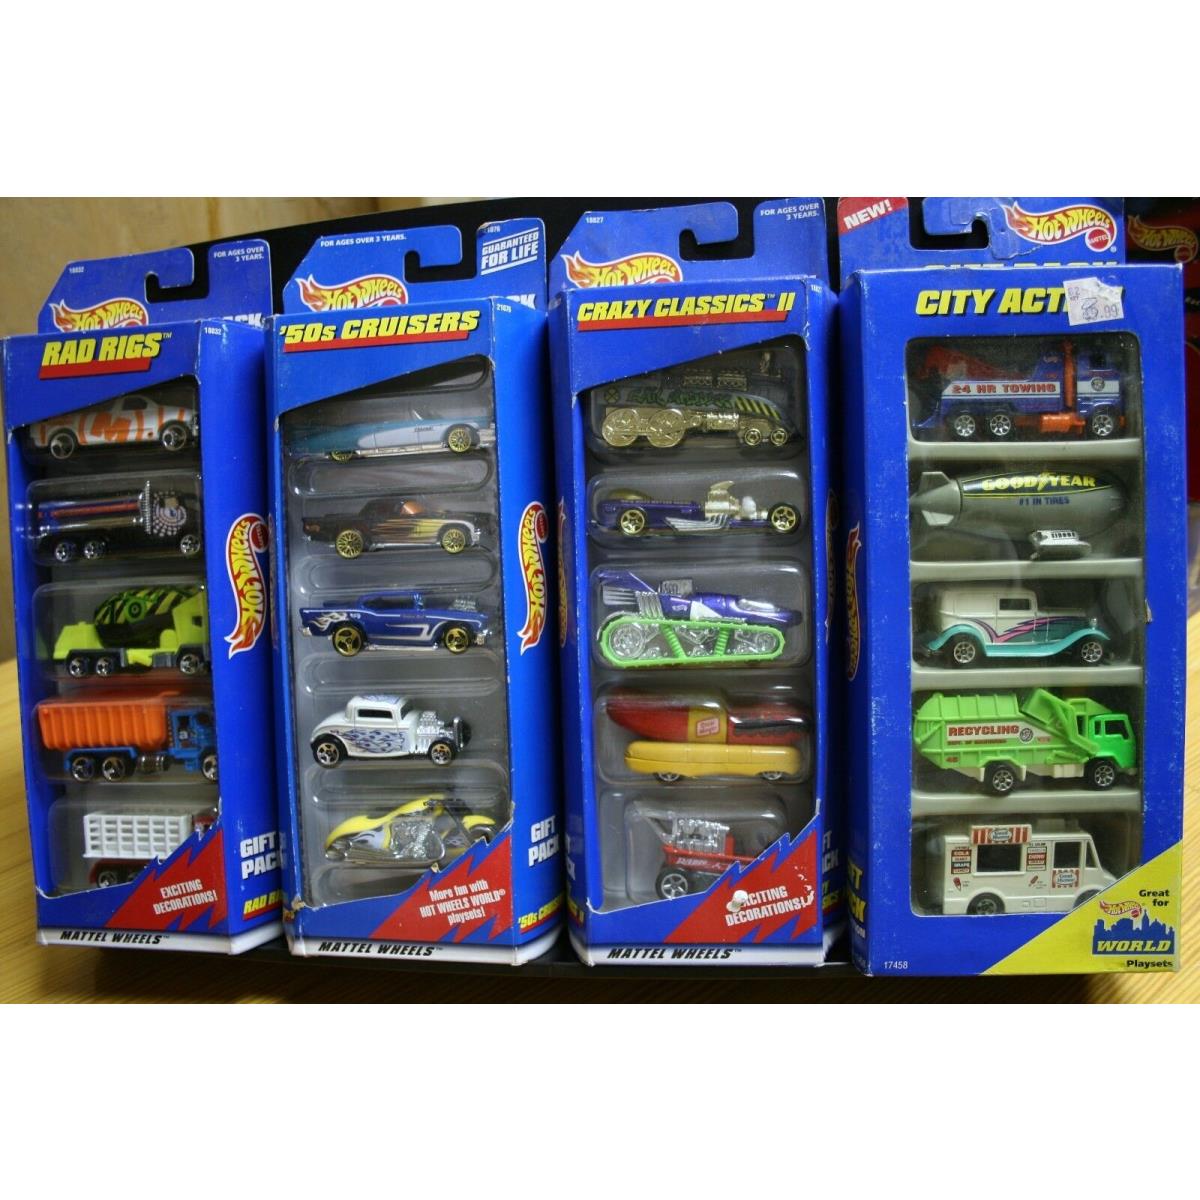 4 Hot Wheels Gift Packs 20 Cars Rad Rigs `50S Cruisers City Action Crazy Cla